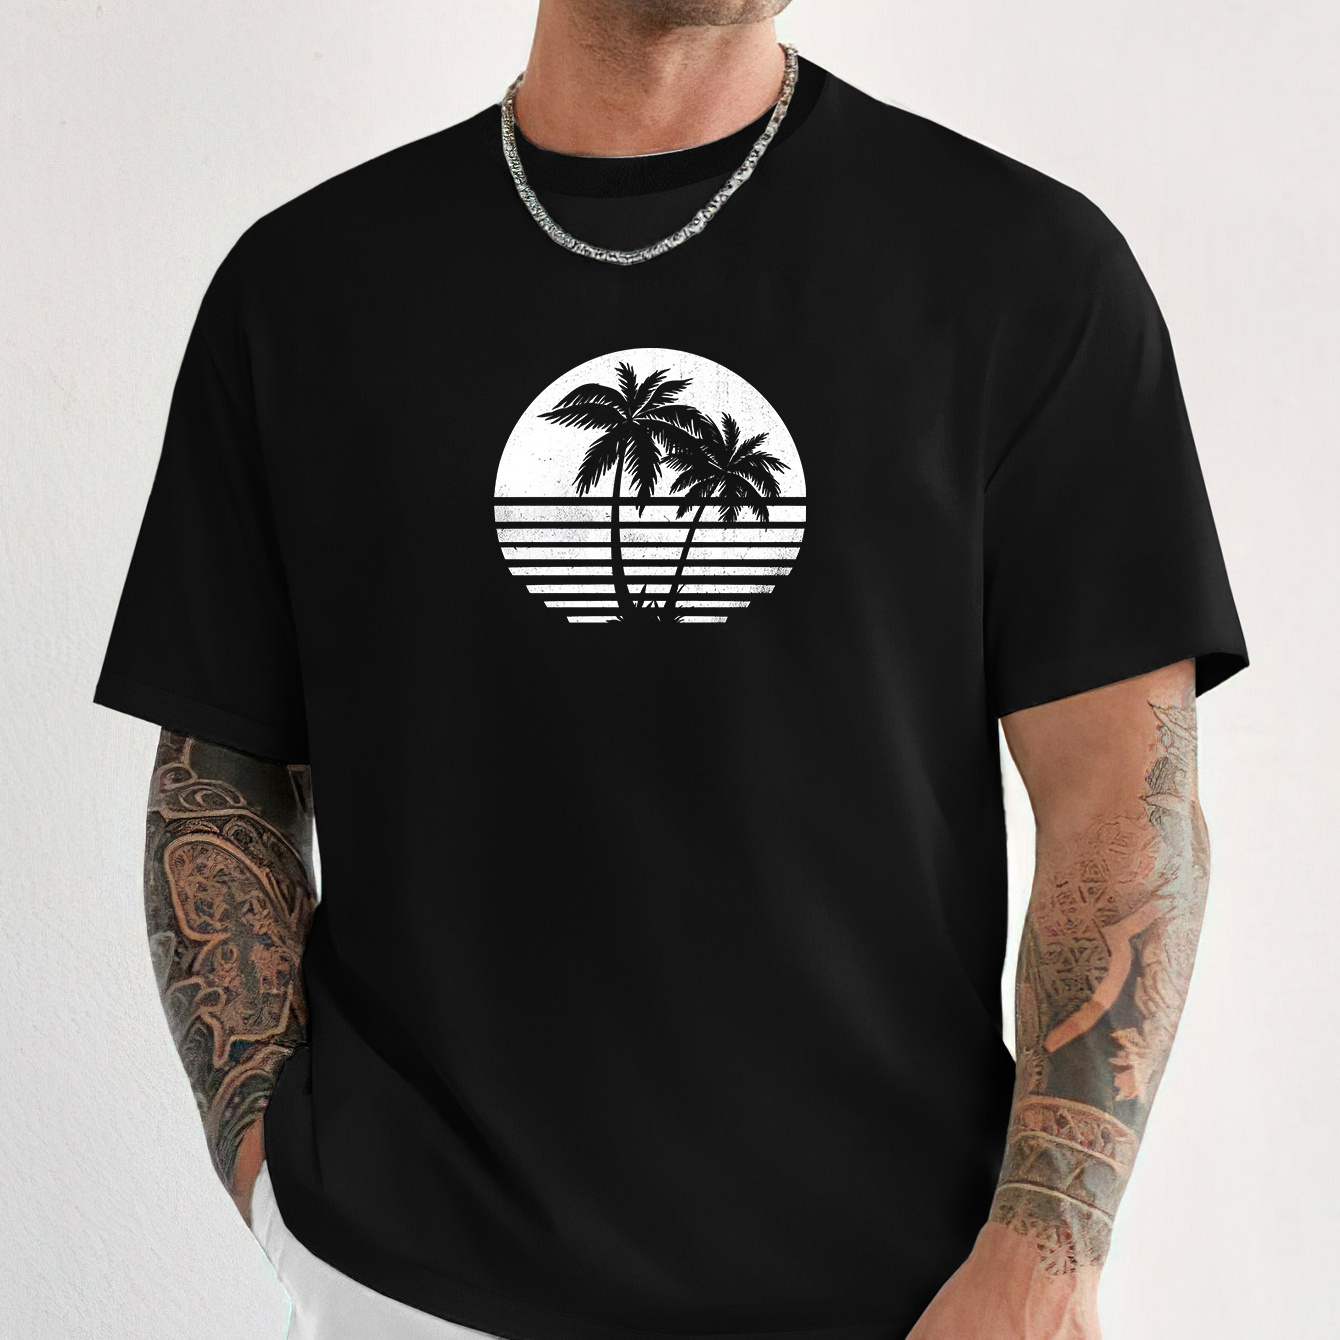 

Tropical Palm Trendy Print Casual Short-sleeved T-shirt For Men, Spring And Summer Top, Comfortable Round Neck Tee, Regular Fit, Versatile Fashion For Everyday Wear